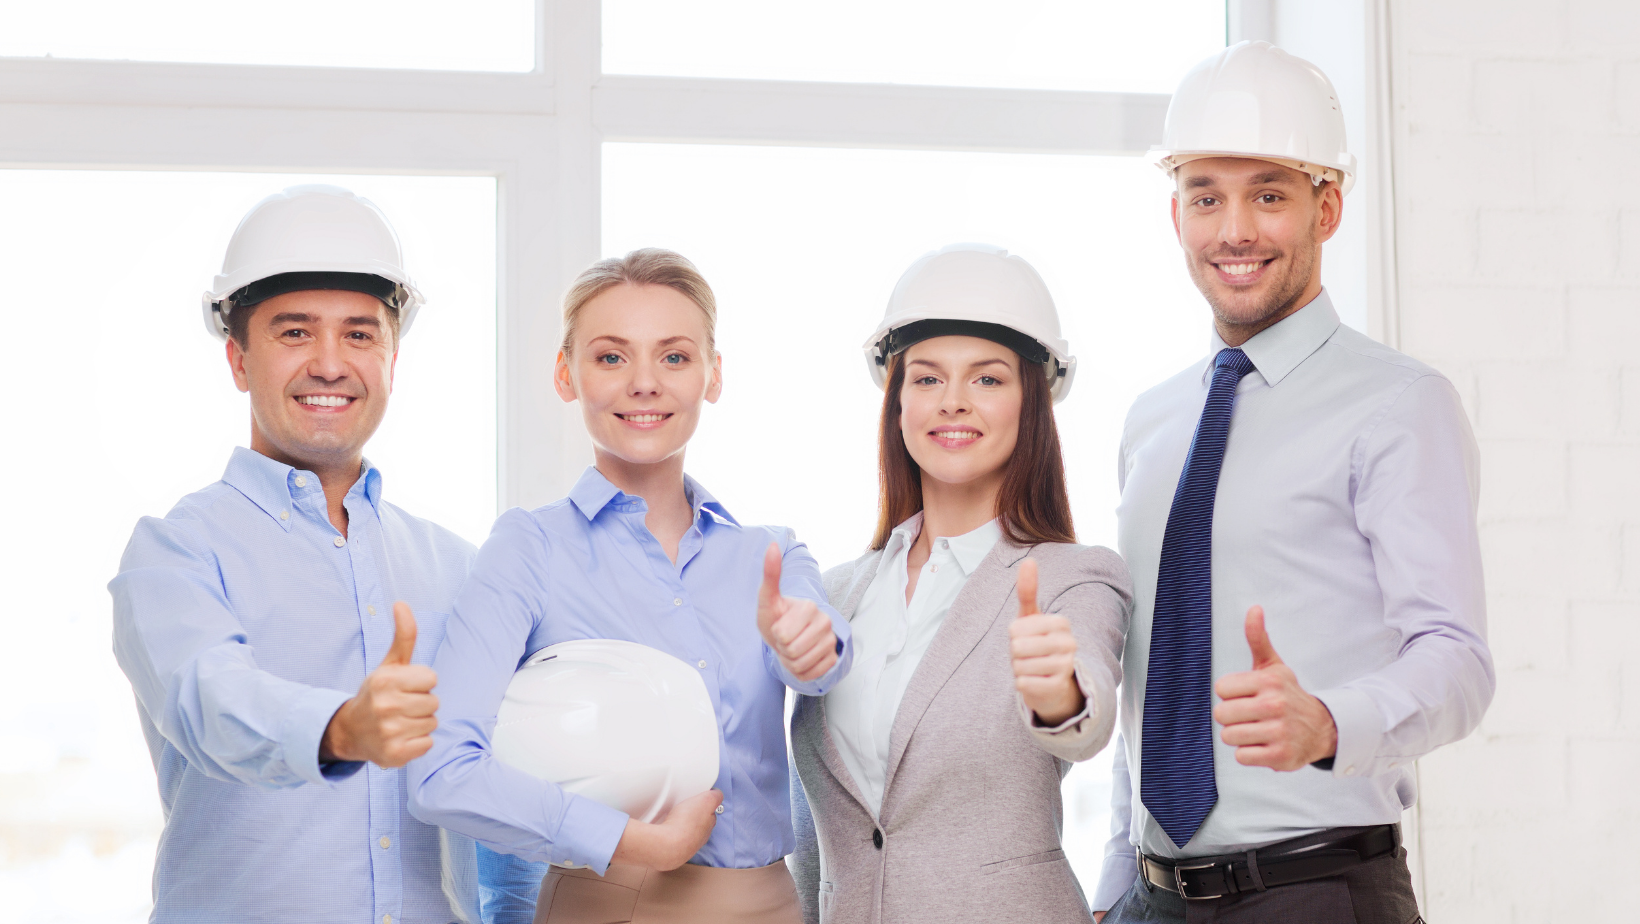 This team of four people give four thumbs up to workplace safety.